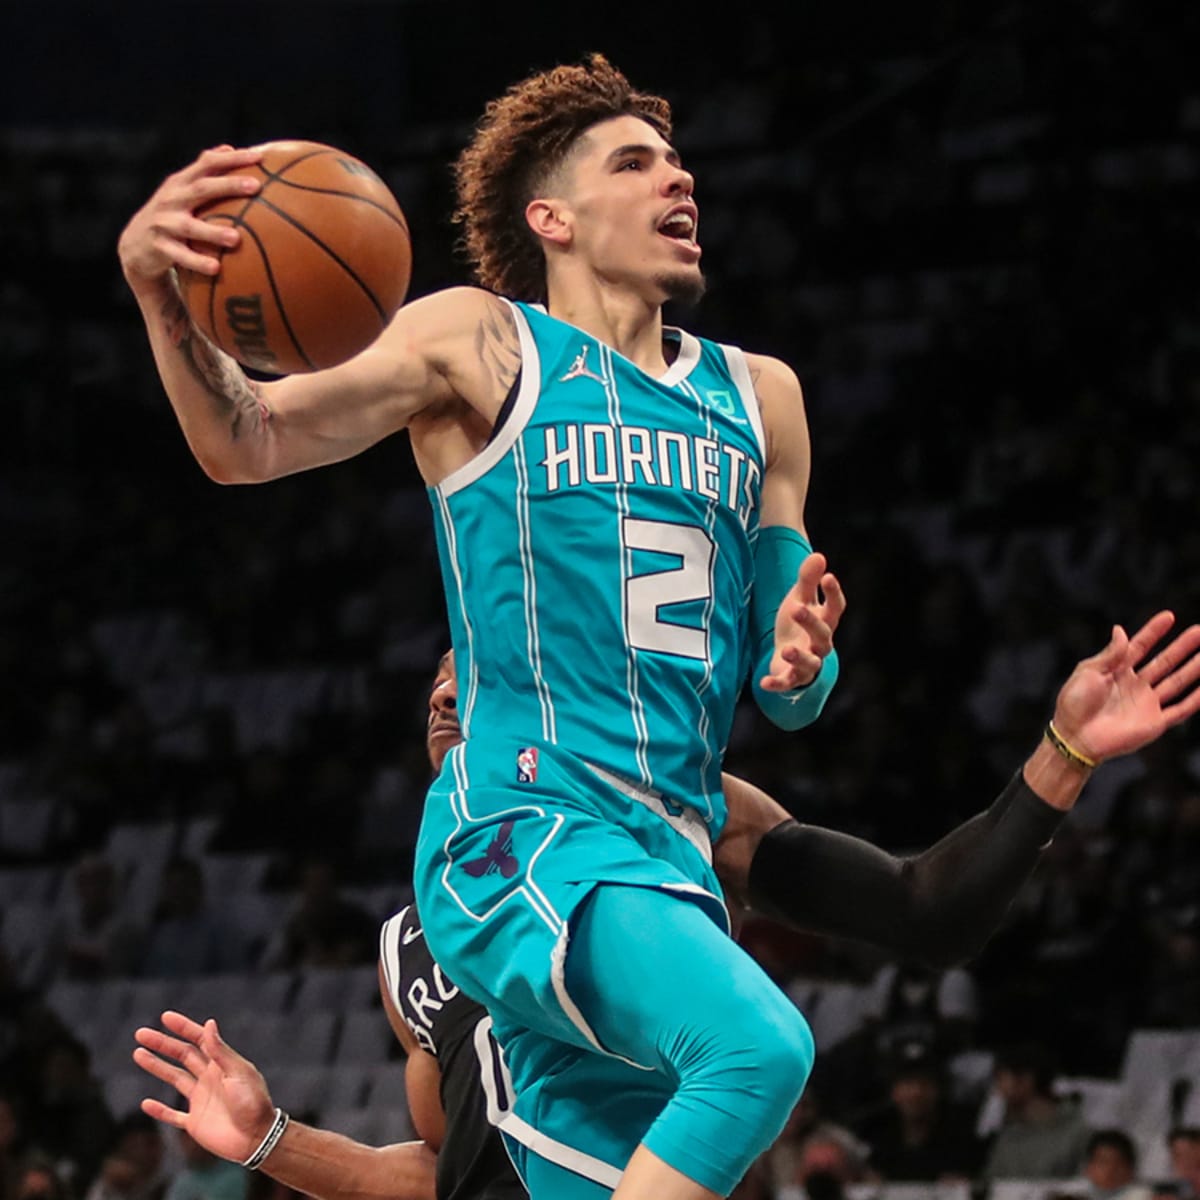 Charlotte Hornets are the NBA's most entertaining team - Sports Illustrated